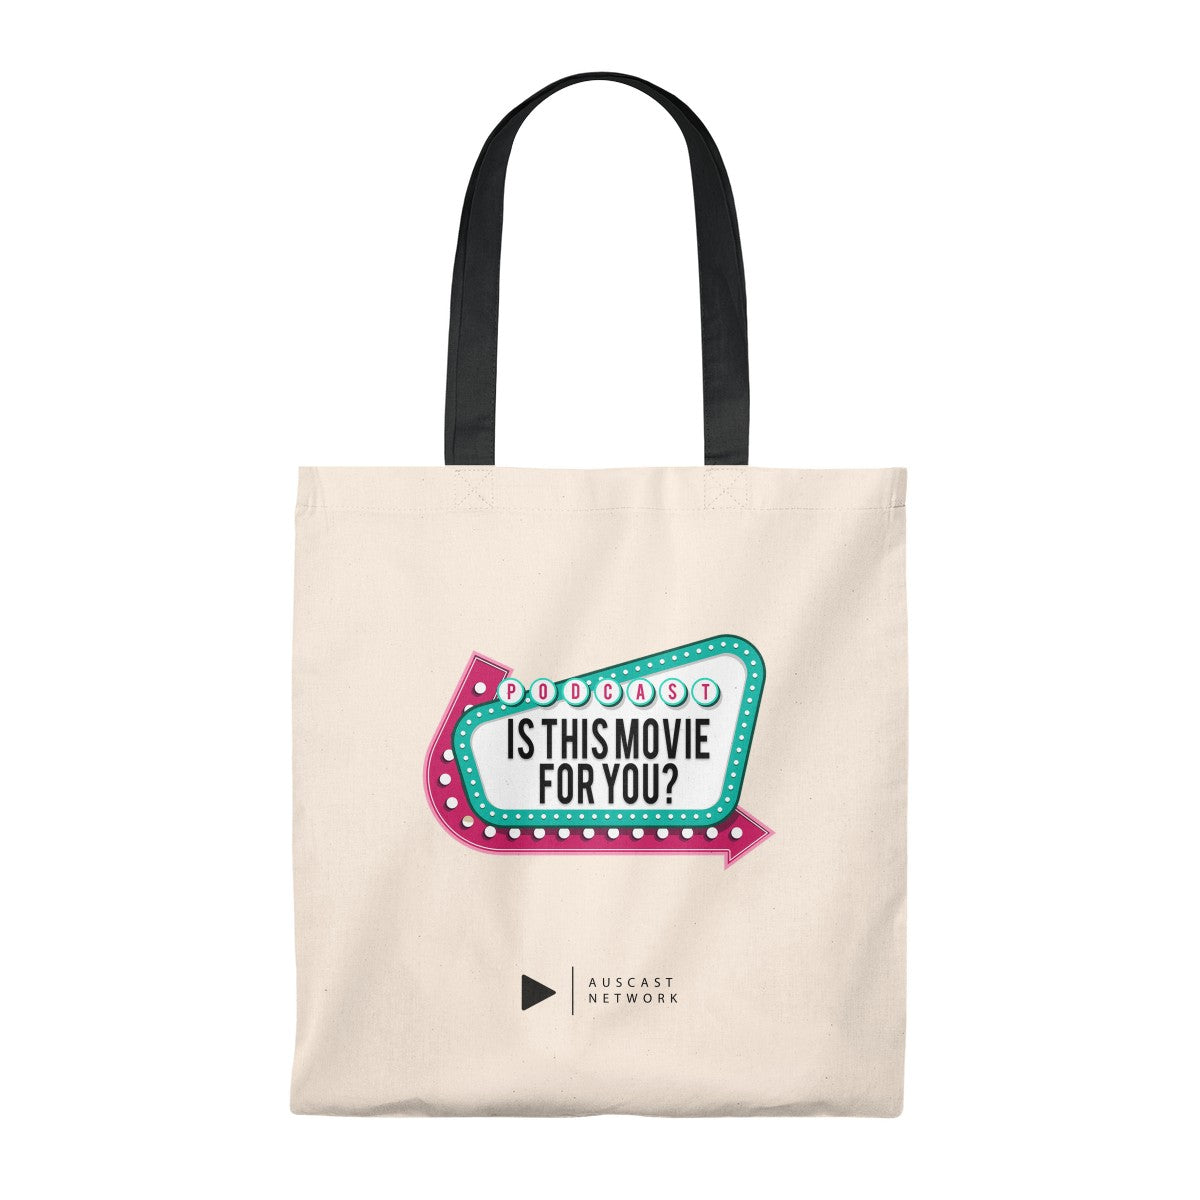 Is This Movie For You? Tote Bag - Vintage